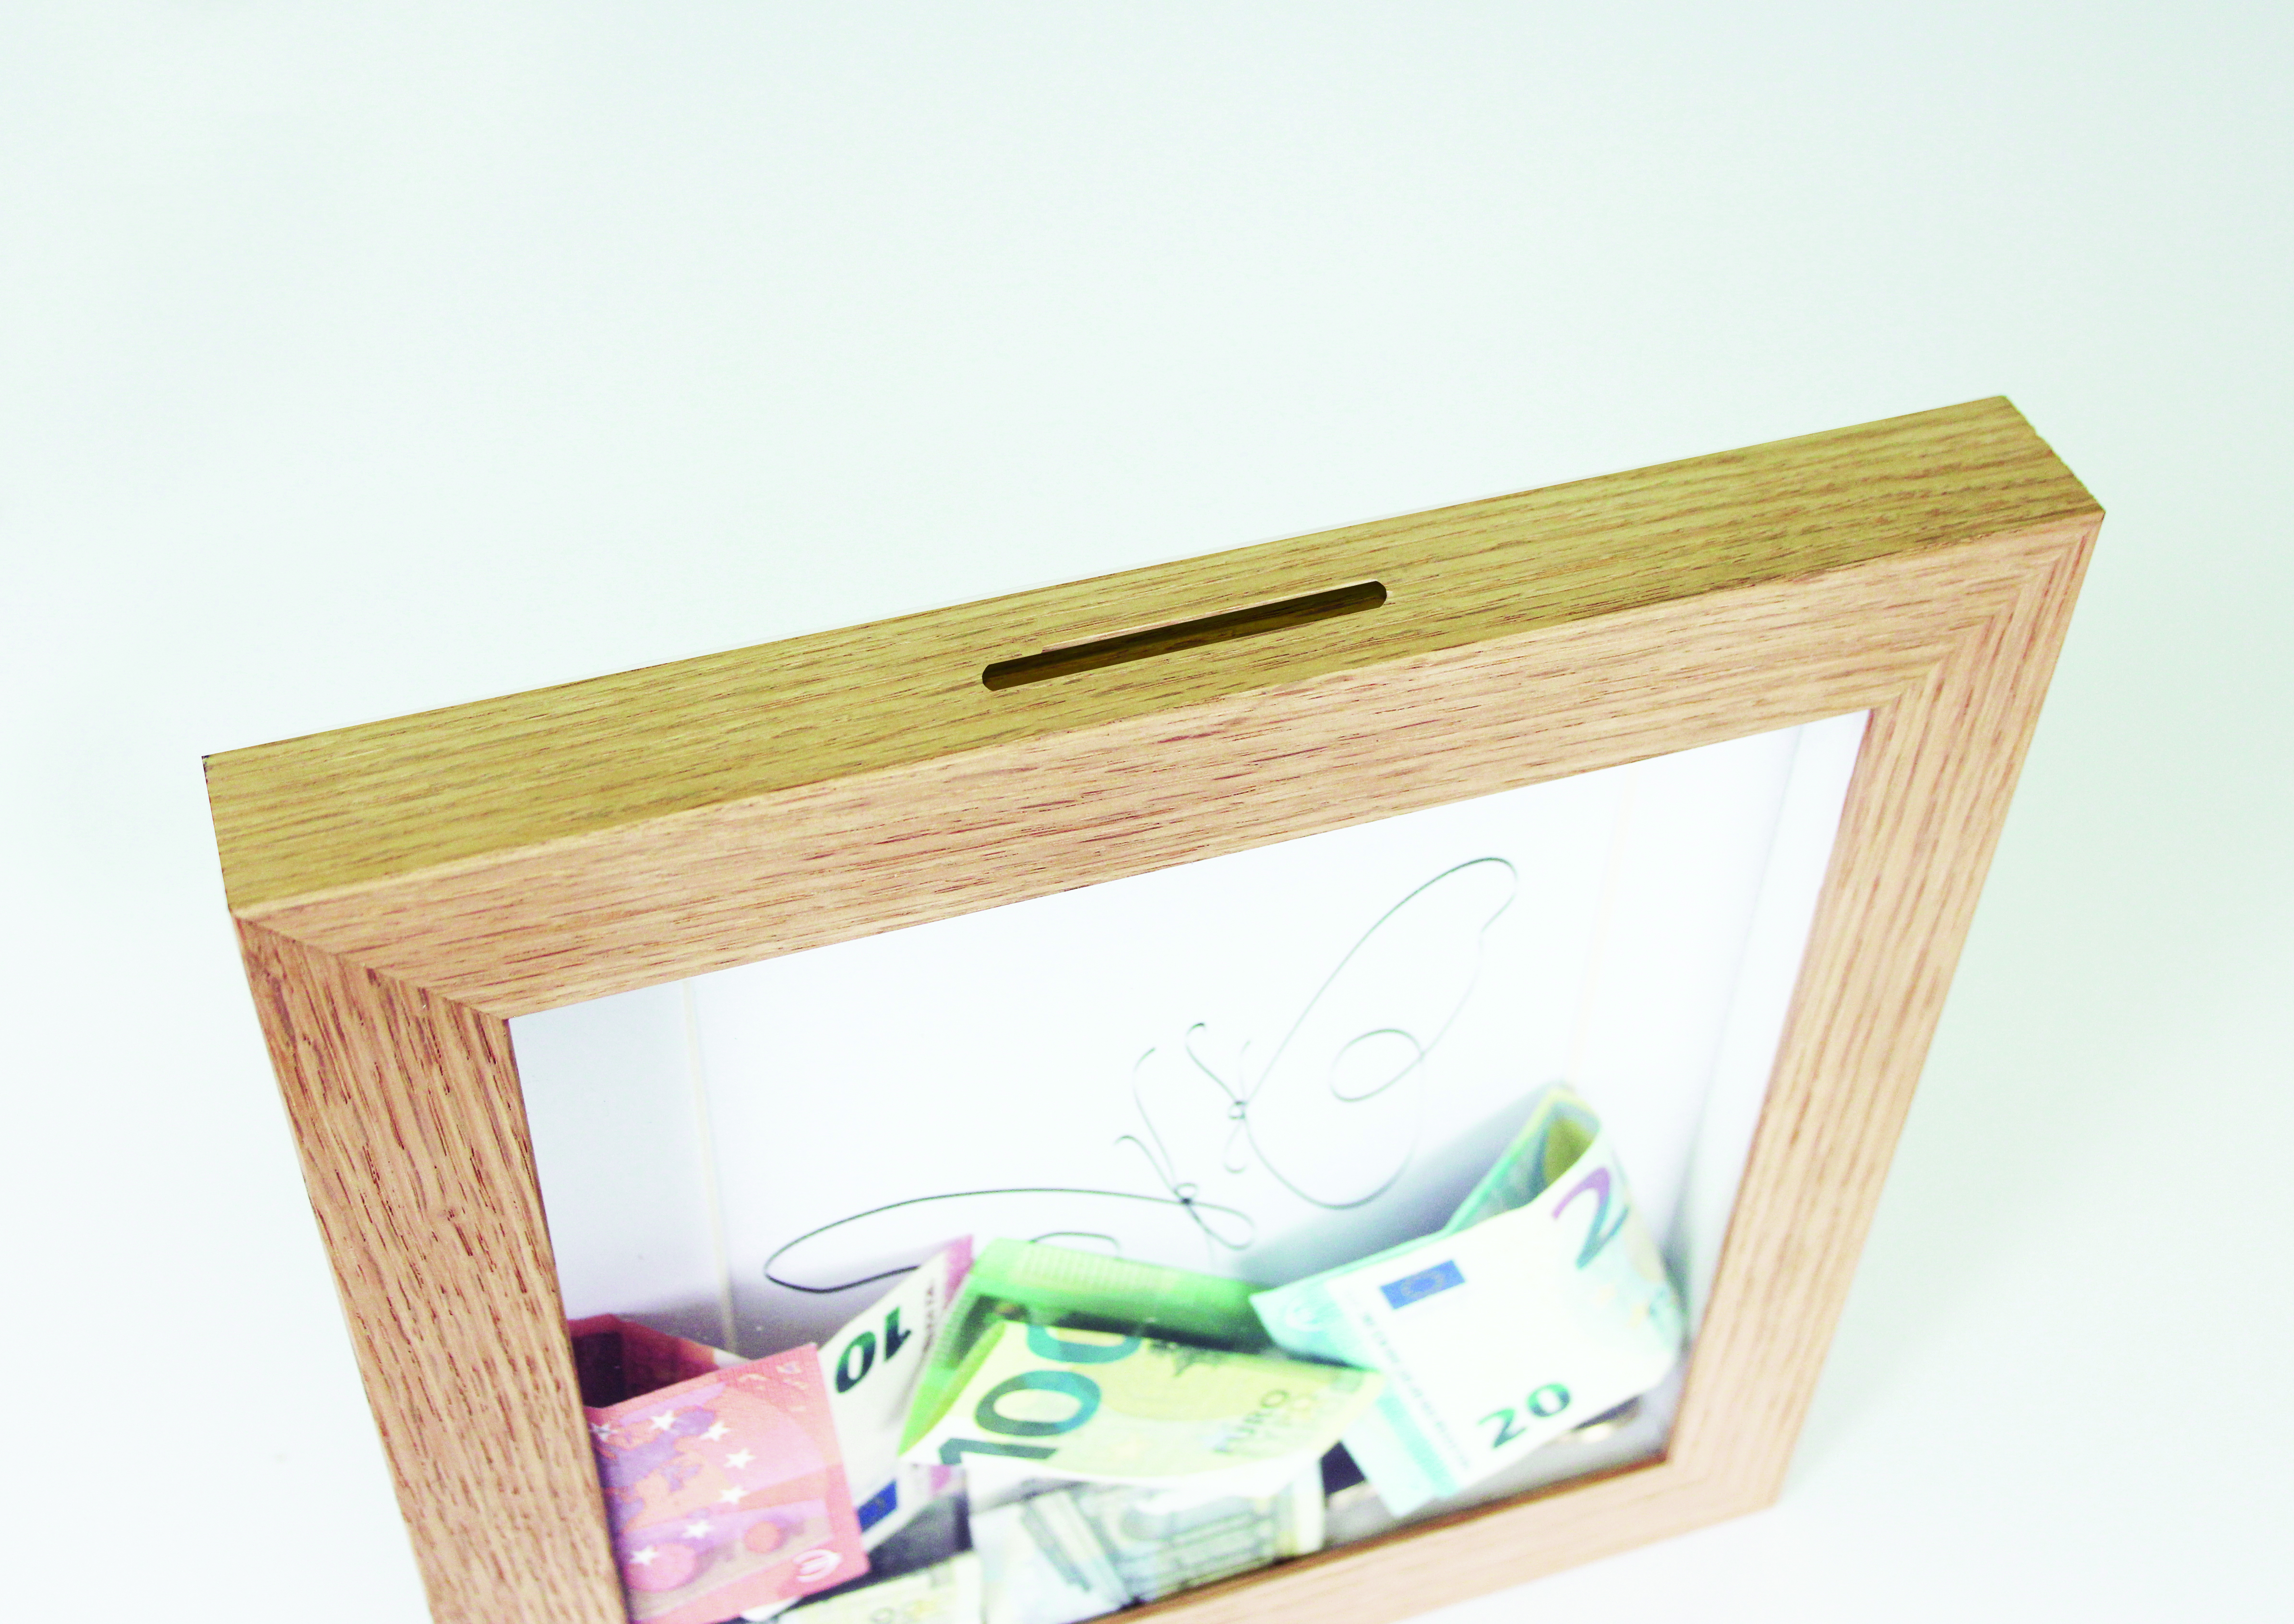 Oak wood frame made as money box, with 3D effect and slot for money, detailed top view. Picture frame producer Debex Suisse.